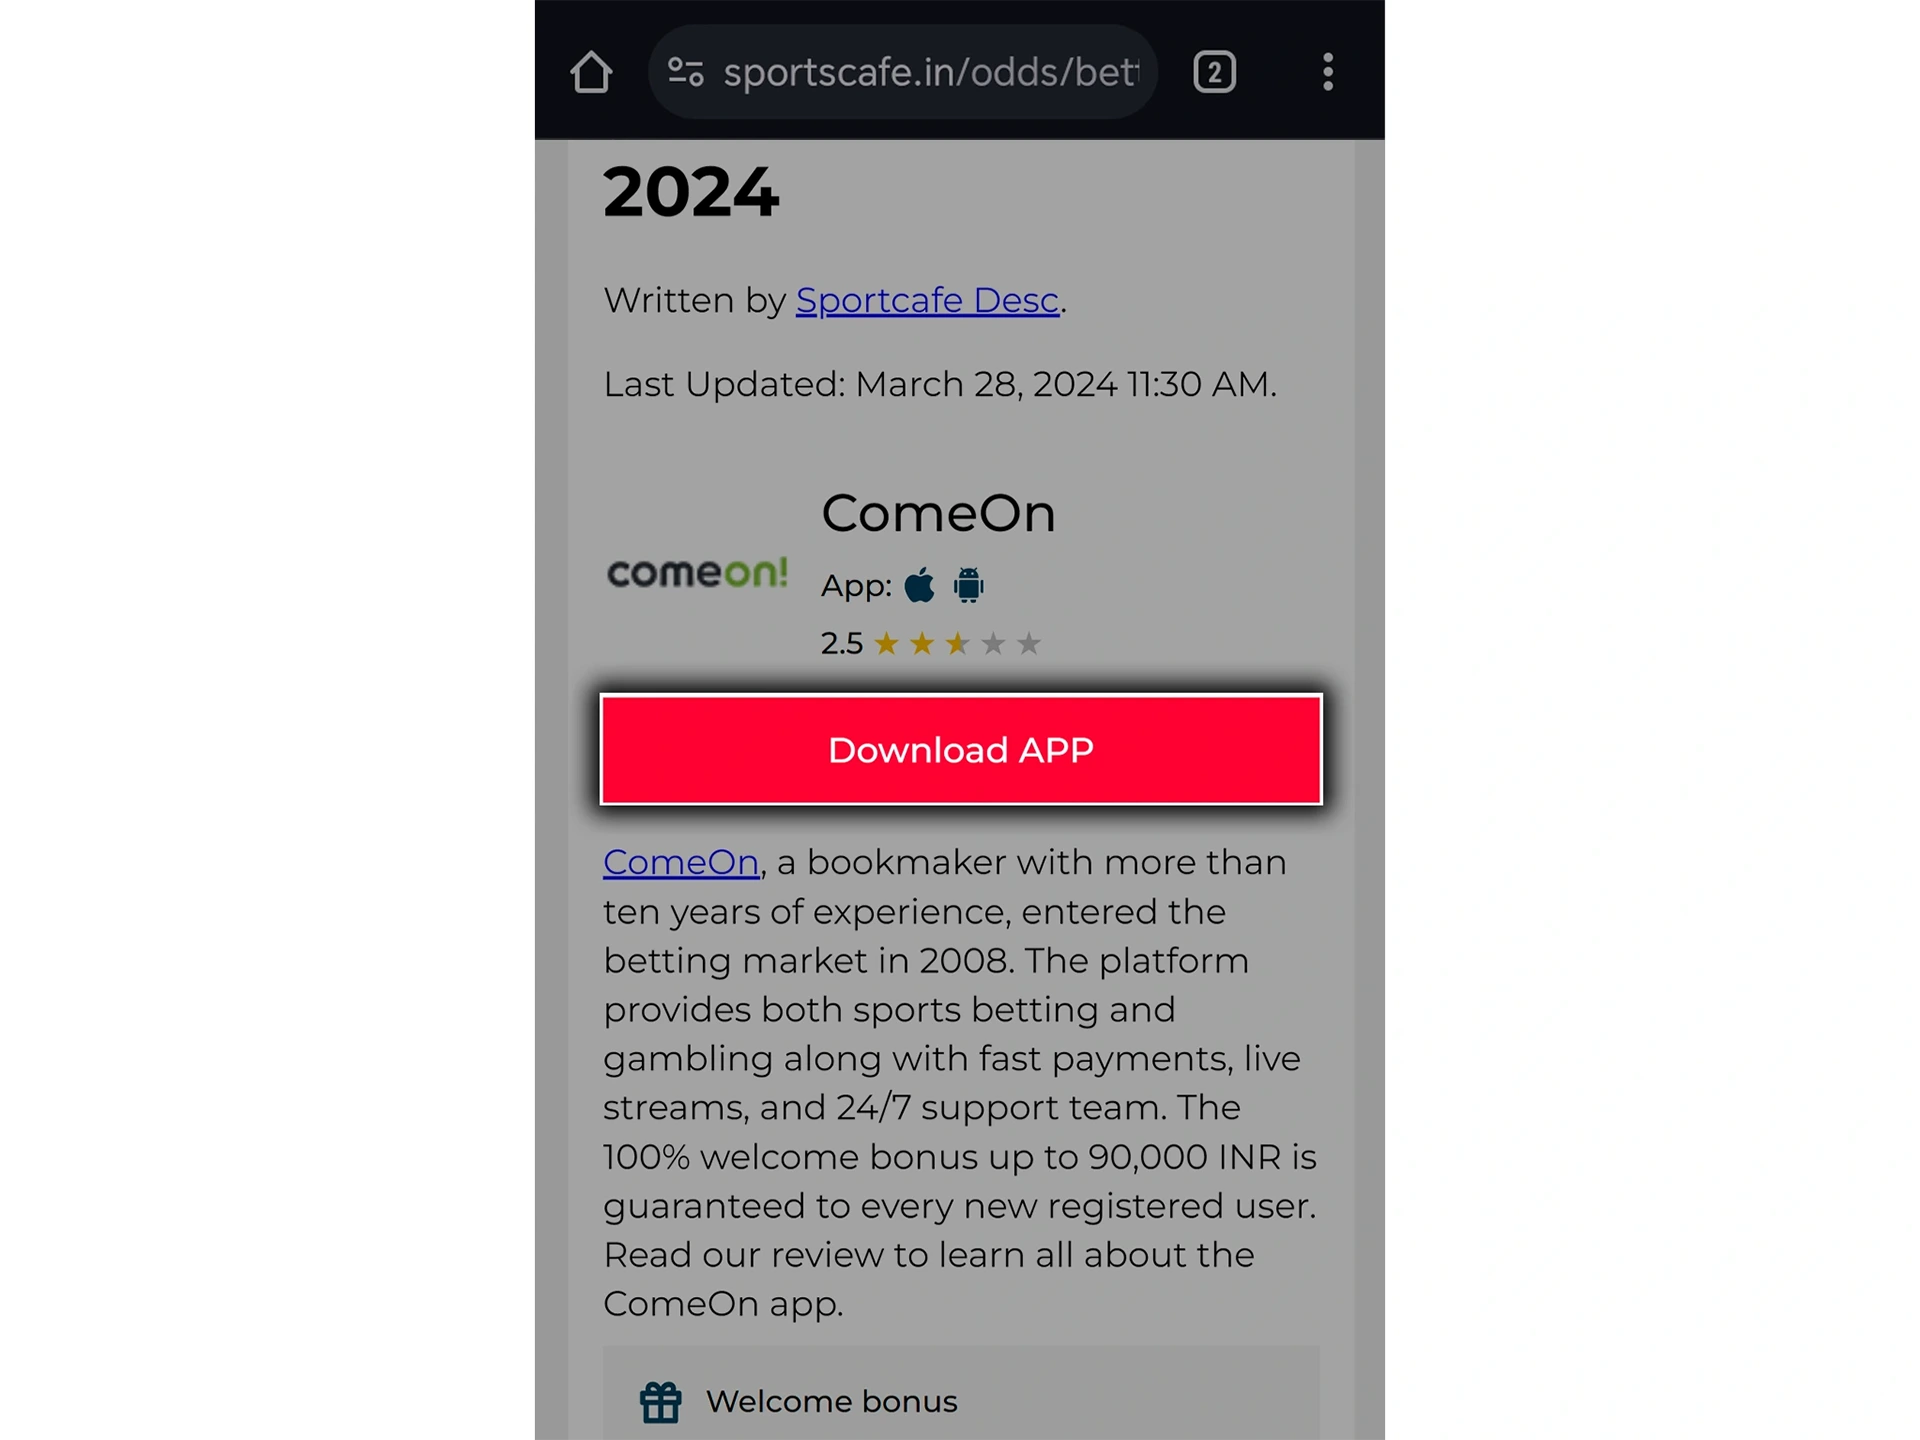 Use the link to download the ComeOn application installation file.